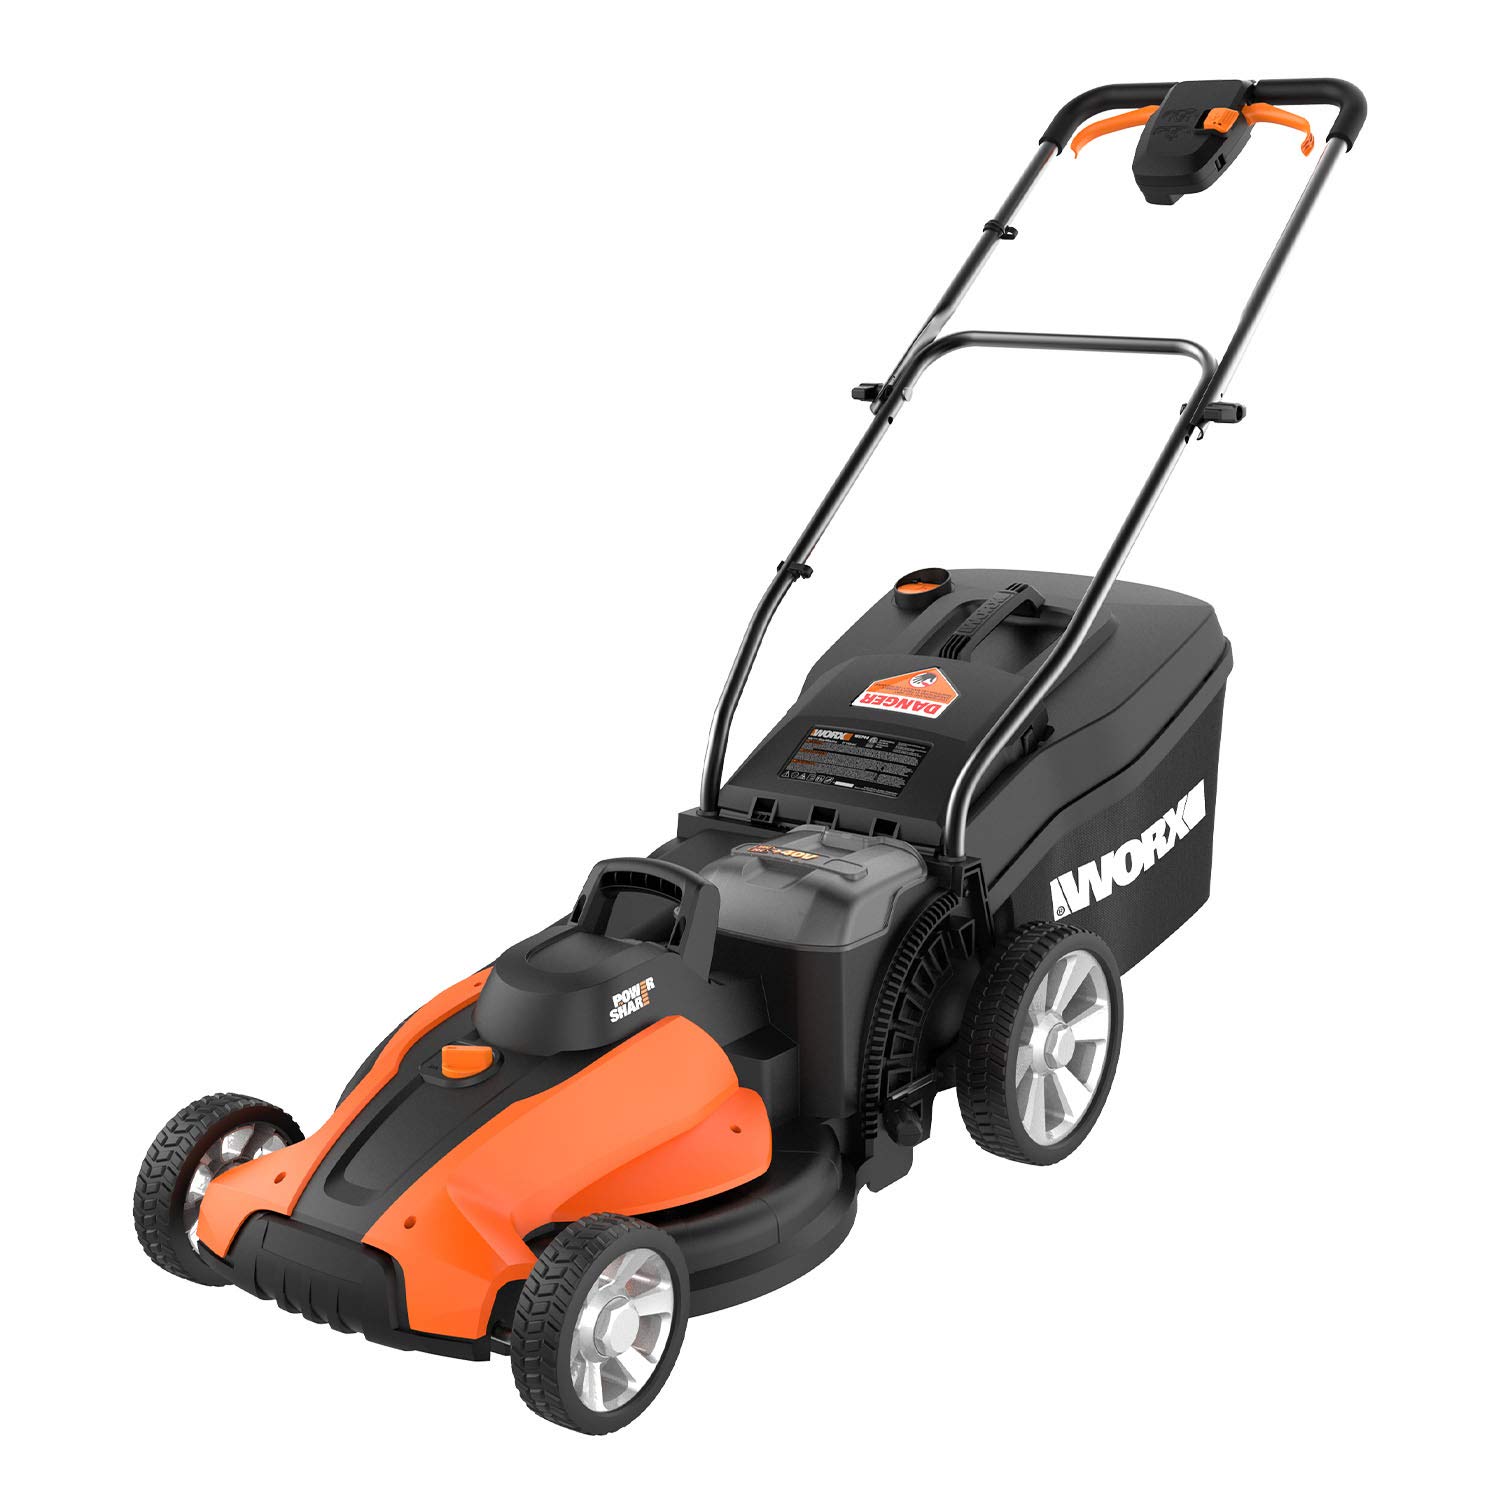 Worx WG744 17-inch 2x20V (4.0Ah) Cordless Lawn Mower, 2 Batteries and Charger Included